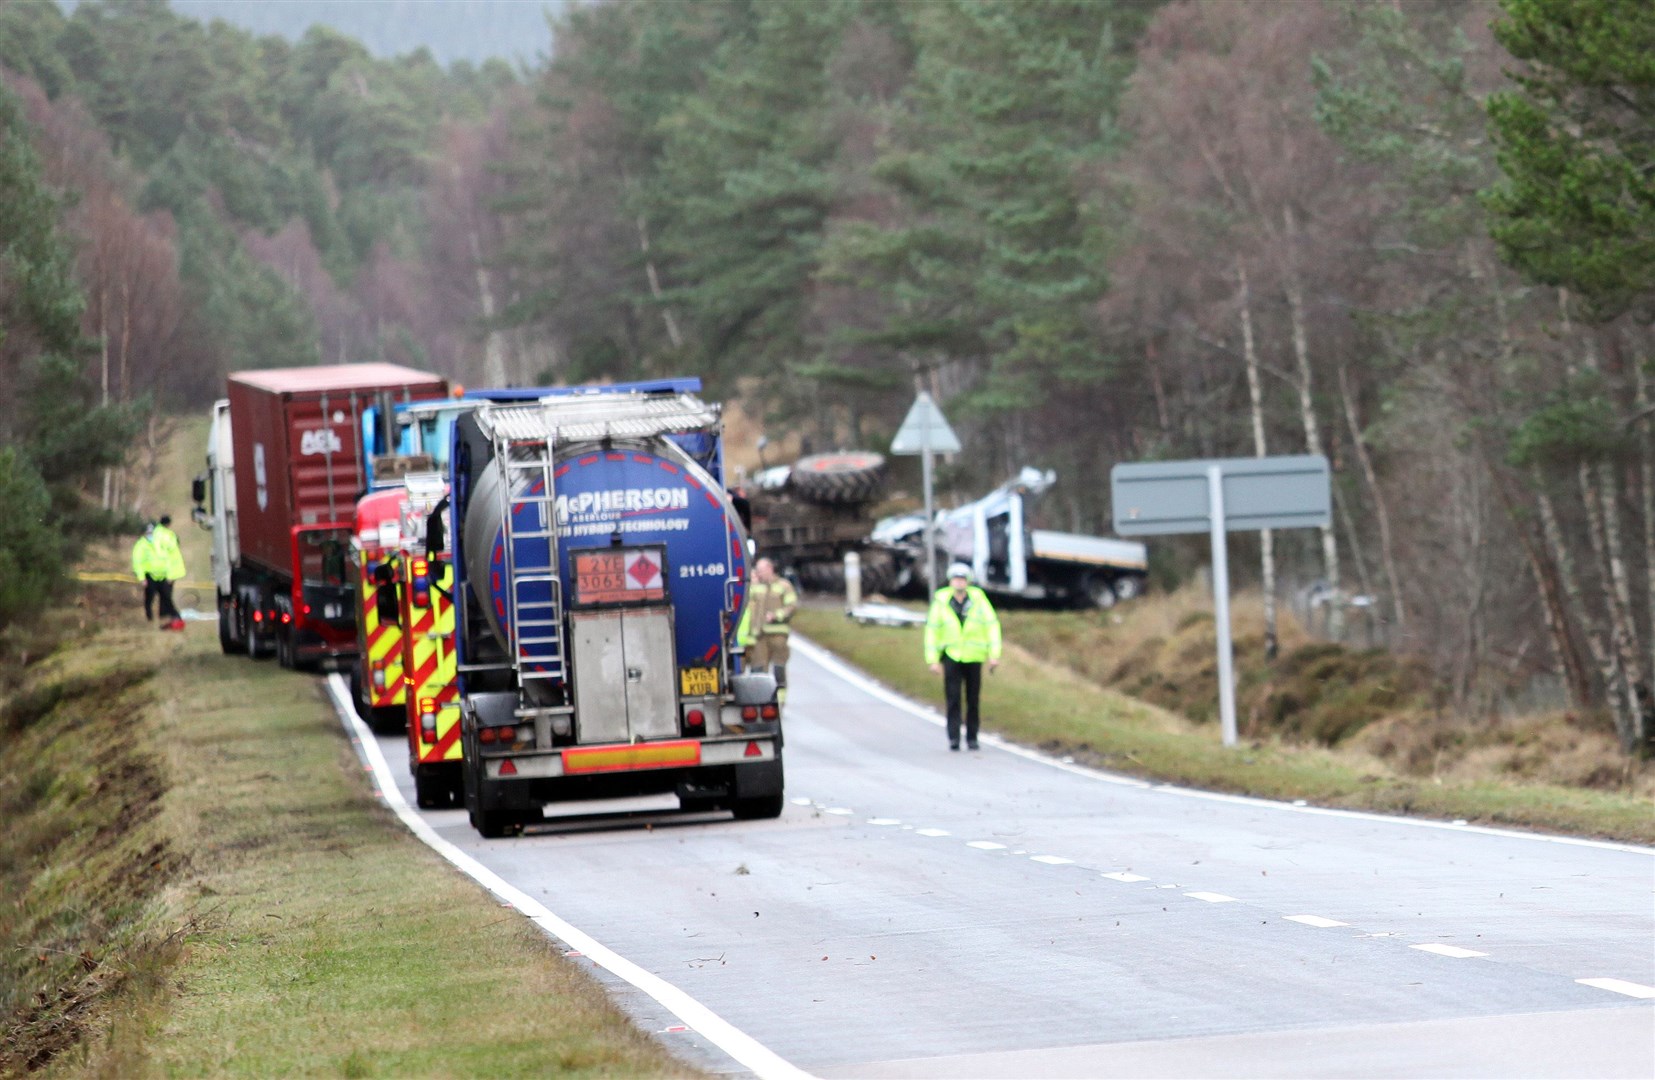 The scene of the accident this morning at the Skye of Curr junction on the A95 Aviemore-Grantown road.